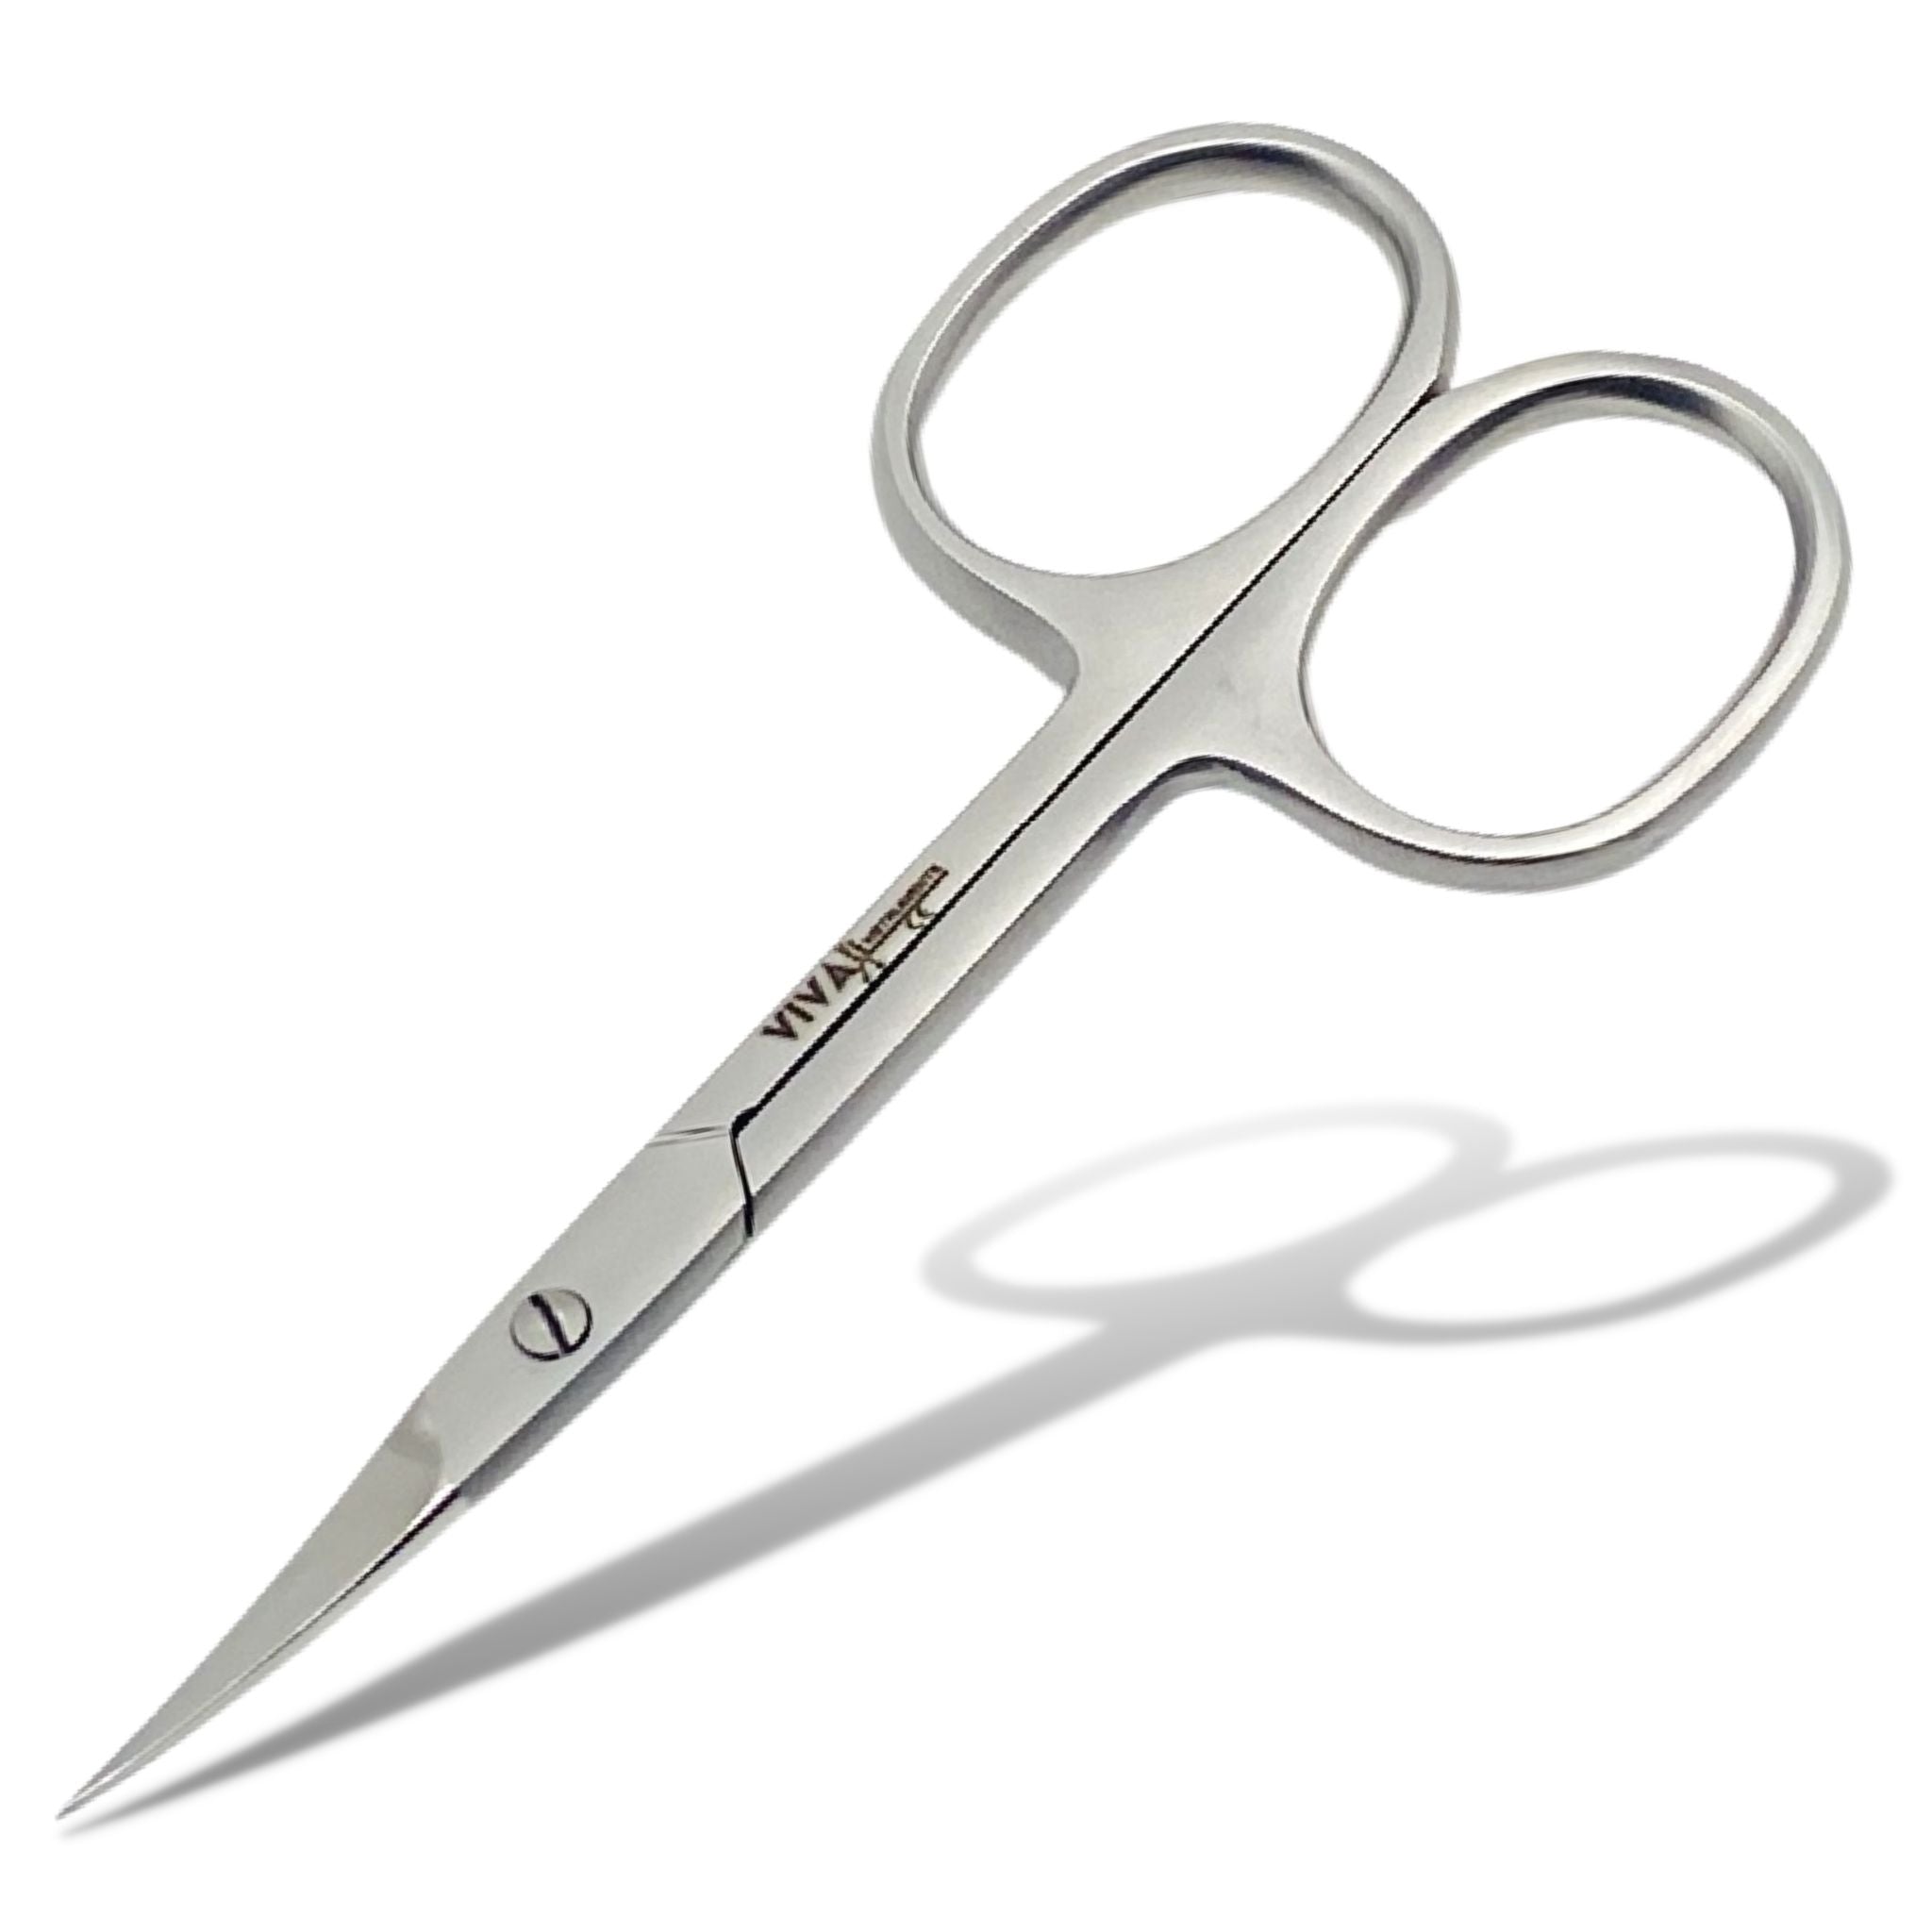 Cuticle nail scissor stainless steel high quality - viva instruments